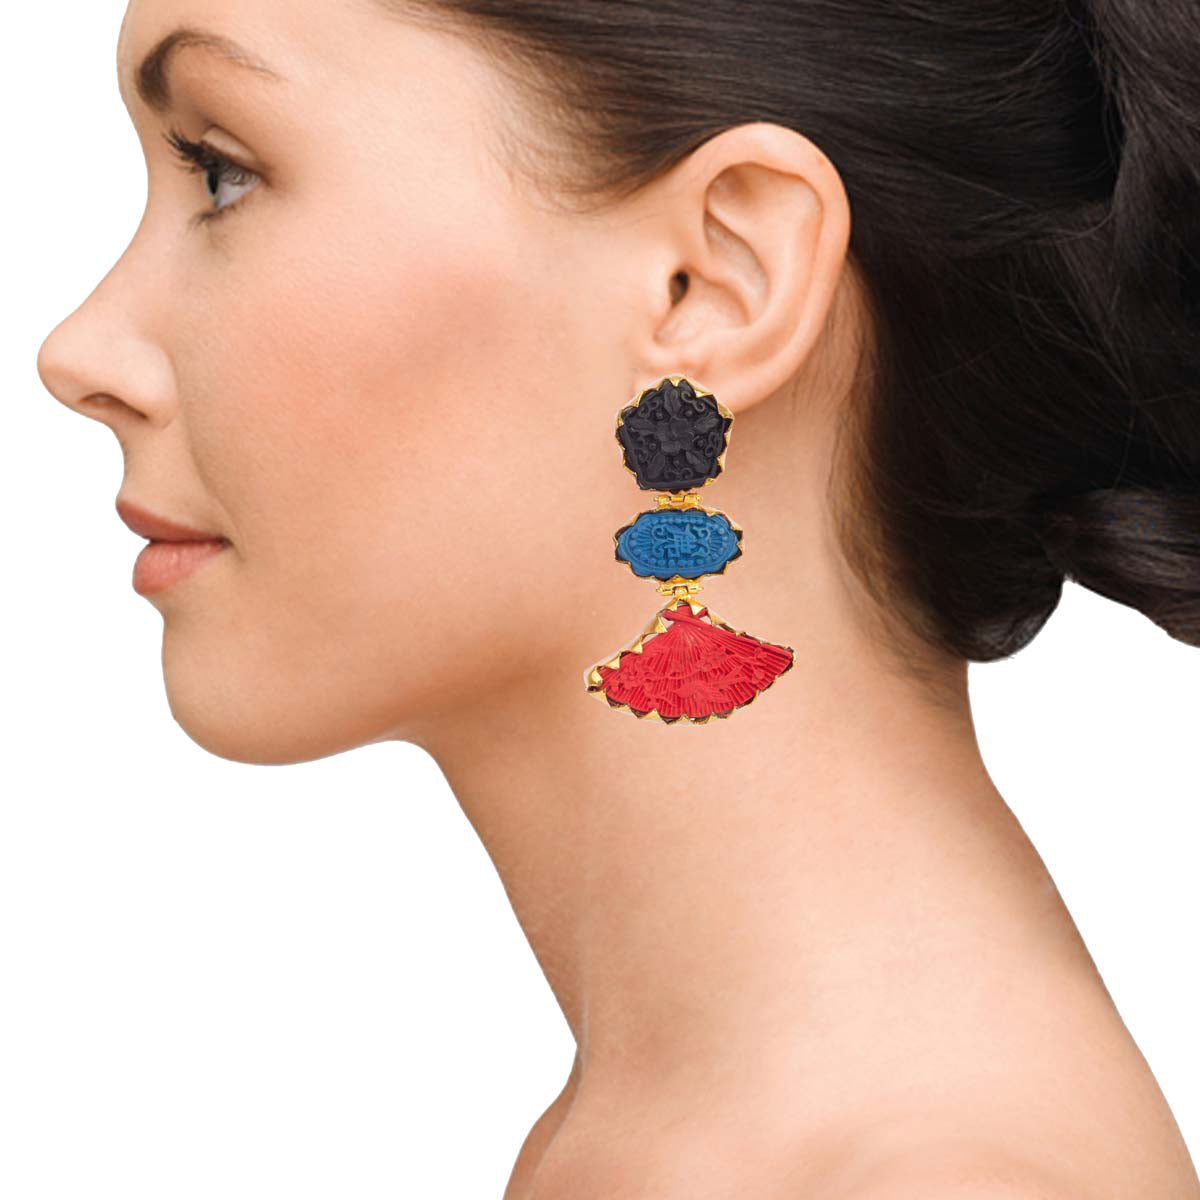 Black, Blue And Red Rock Earrings